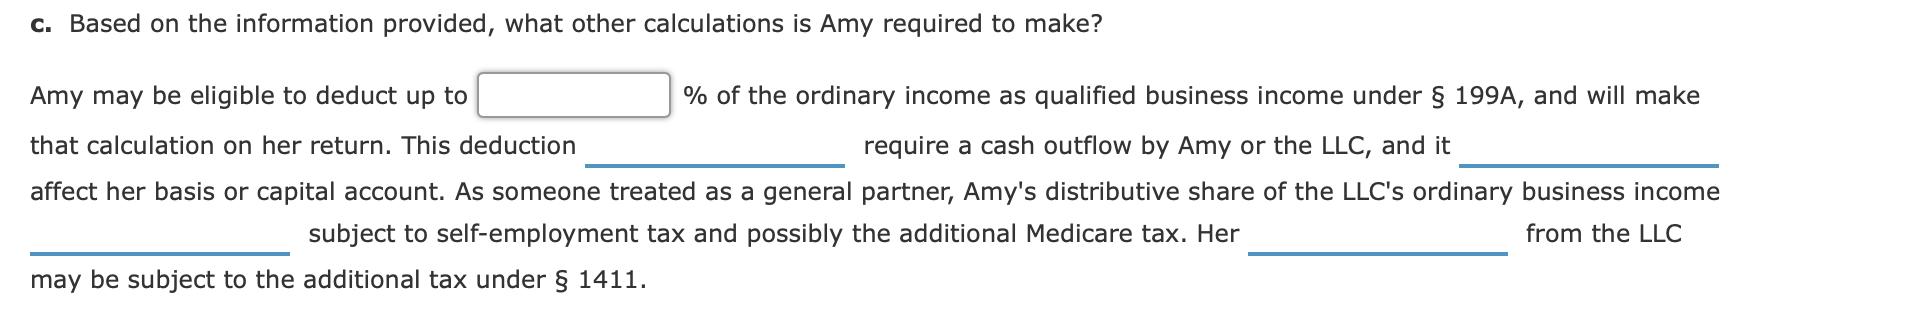 c. Based on the information provided, what other calculations is Amy required to make? Amy may be eligible to deduct up to %